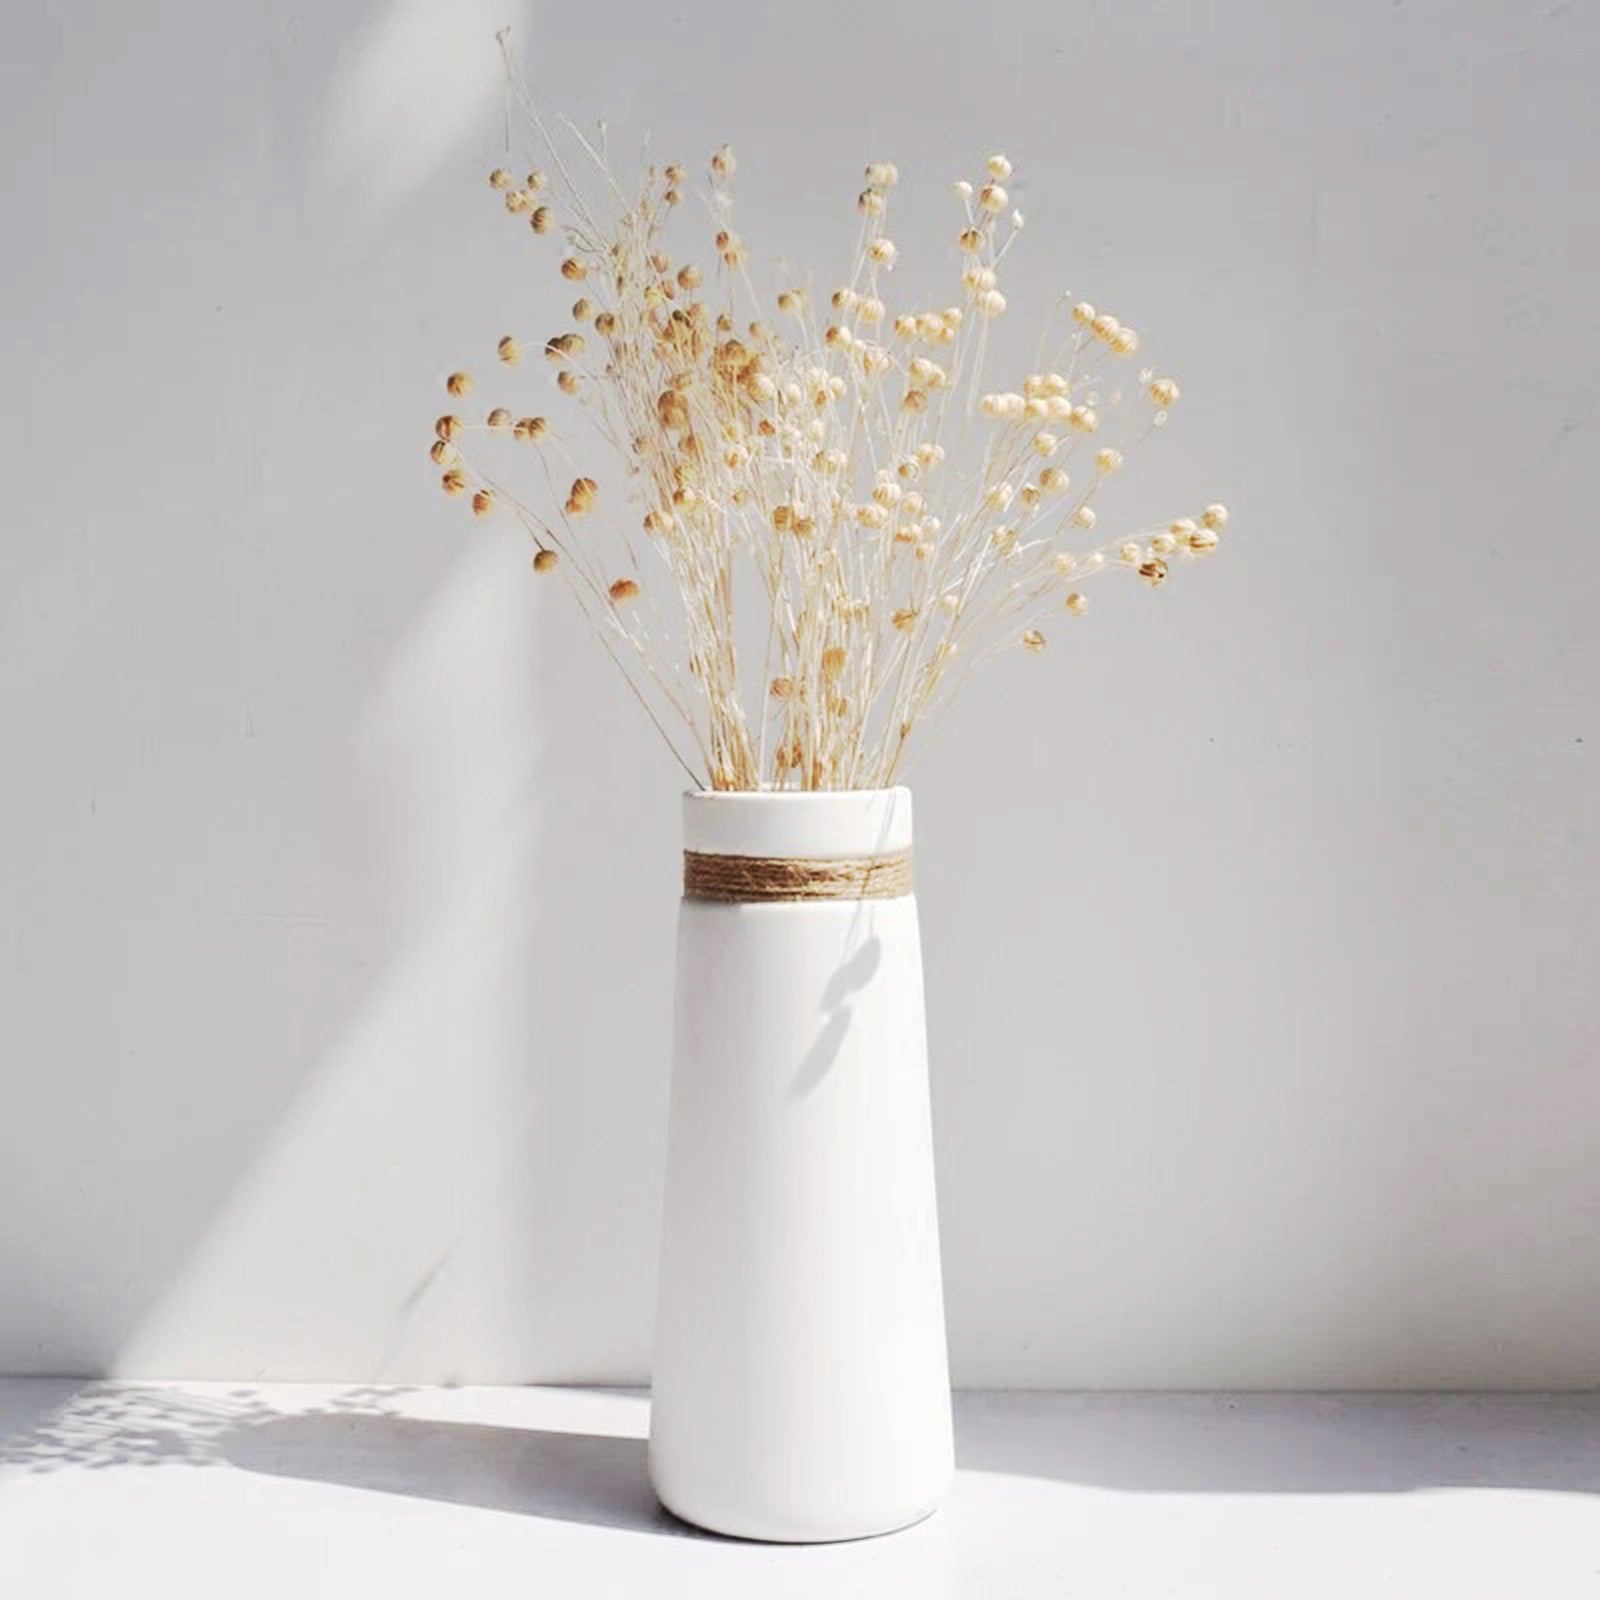 Chic Nordic Vase: Minimalist Beauty with a String of Elegance